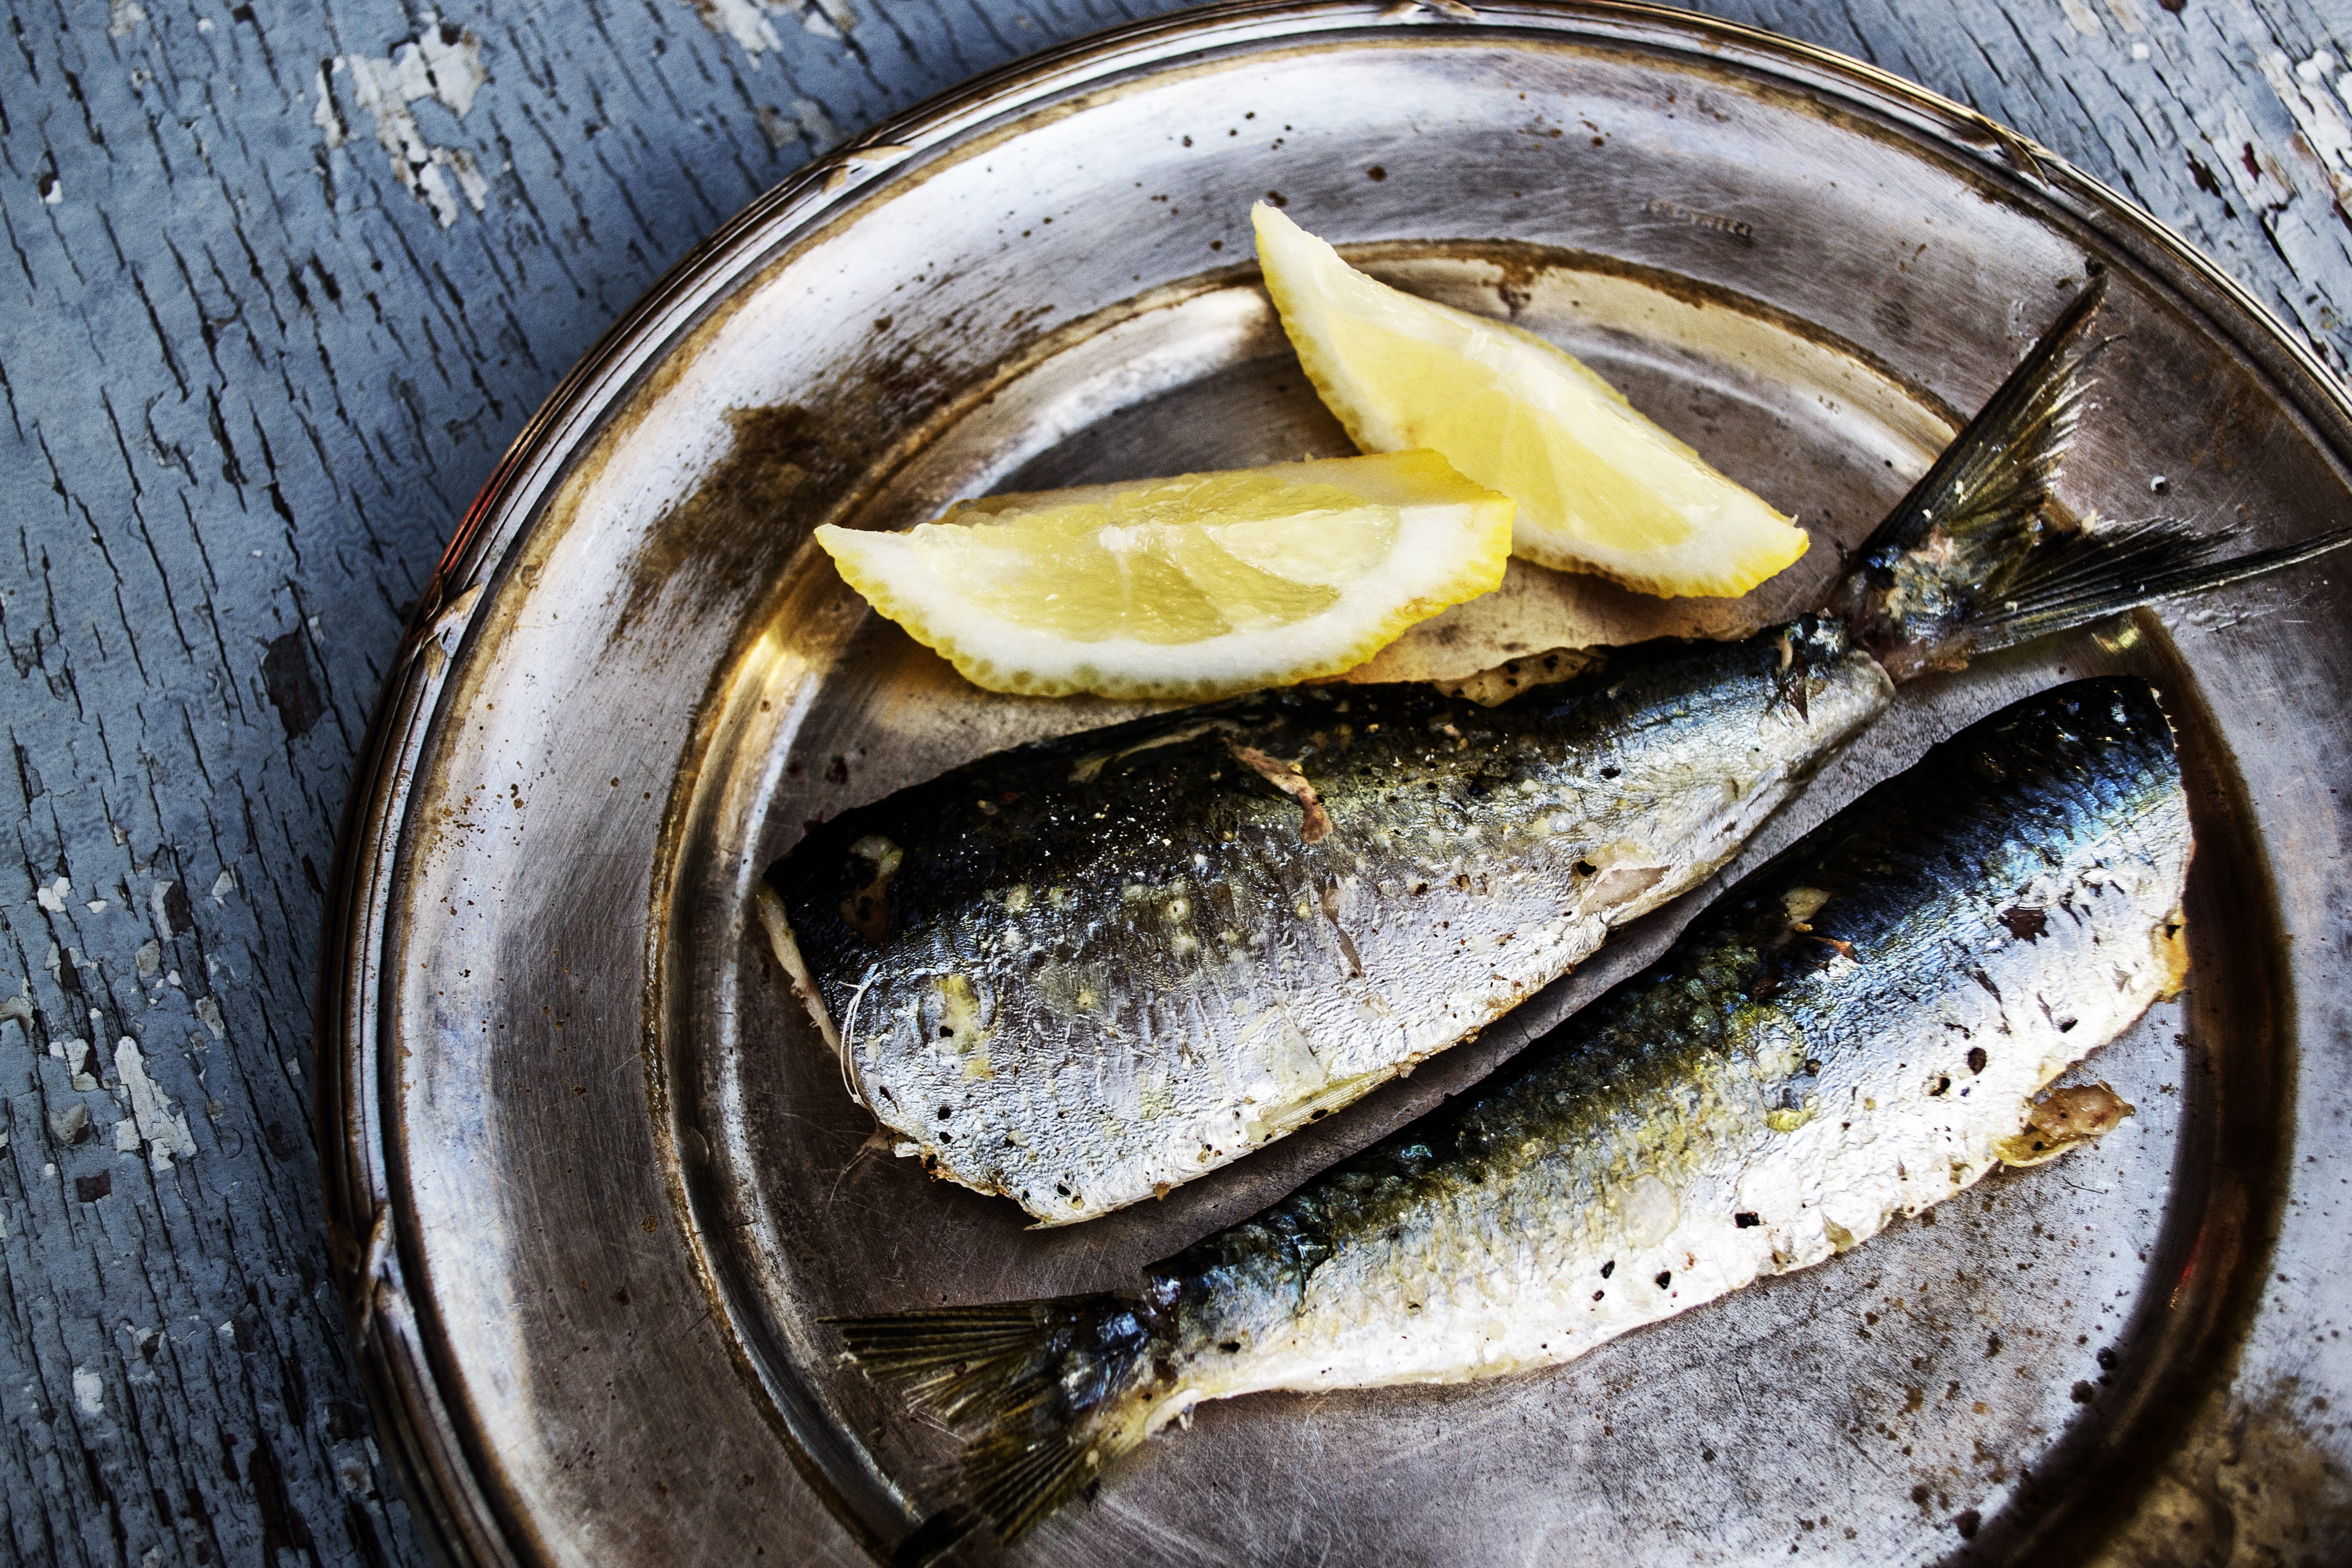 dried fish with lemons on plate, sardines, fish pictures, sea food